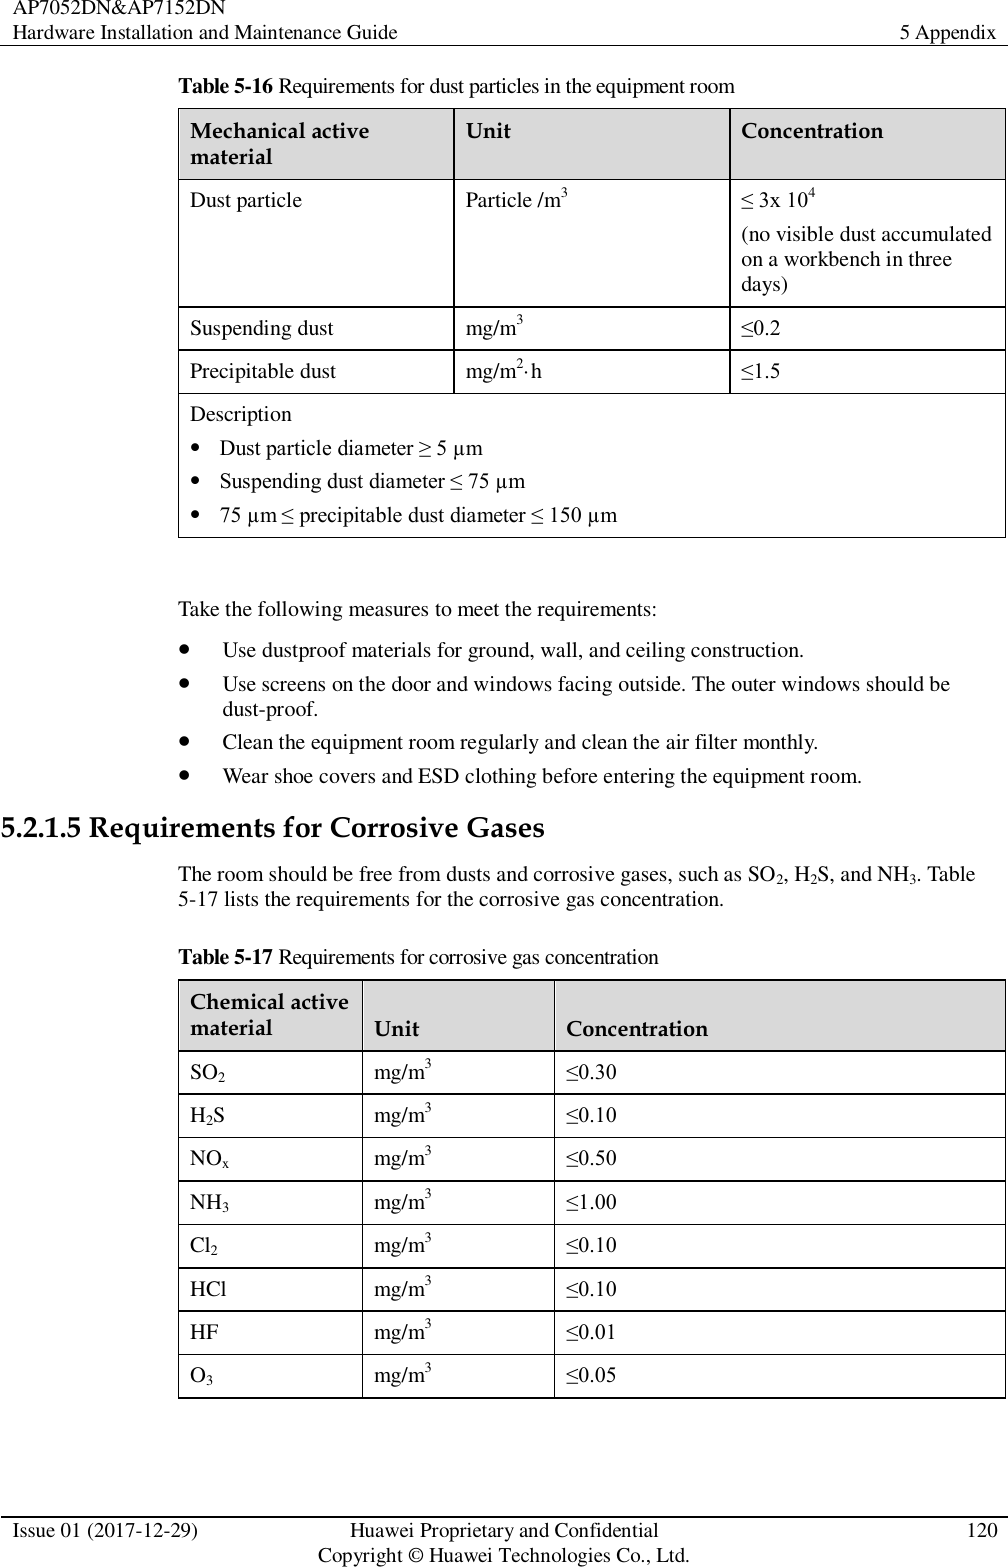 AP7052DN&amp;AP7152DN Hardware Installation and Maintenance Guide 5 Appendix  Issue 01 (2017-12-29) Huawei Proprietary and Confidential                                     Copyright © Huawei Technologies Co., Ltd. 120  Table 5-16 Requirements for dust particles in the equipment room Mechanical active material Unit Concentration Dust particle Particle /m3 ≤ 3x 104 (no visible dust accumulated on a workbench in three days) Suspending dust mg/m3 ≤0.2 Precipitable dust mg/m2·h  ≤1.5 Description  Dust particle diameter ≥ 5 µm  Suspending dust diameter ≤ 75 µm  75 µm ≤ precipitable dust diameter ≤ 150 µm  Take the following measures to meet the requirements:  Use dustproof materials for ground, wall, and ceiling construction.  Use screens on the door and windows facing outside. The outer windows should be dust-proof.  Clean the equipment room regularly and clean the air filter monthly.  Wear shoe covers and ESD clothing before entering the equipment room. 5.2.1.5 Requirements for Corrosive Gases The room should be free from dusts and corrosive gases, such as SO2, H2S, and NH3. Table 5-17 lists the requirements for the corrosive gas concentration. Table 5-17 Requirements for corrosive gas concentration Chemical active material Unit Concentration SO2 mg/m3 ≤0.30 H2S mg/m3 ≤0.10 NOx mg/m3 ≤0.50 NH3 mg/m3 ≤1.00 Cl2 mg/m3 ≤0.10 HCl mg/m3 ≤0.10 HF mg/m3 ≤0.01 O3 mg/m3 ≤0.05  